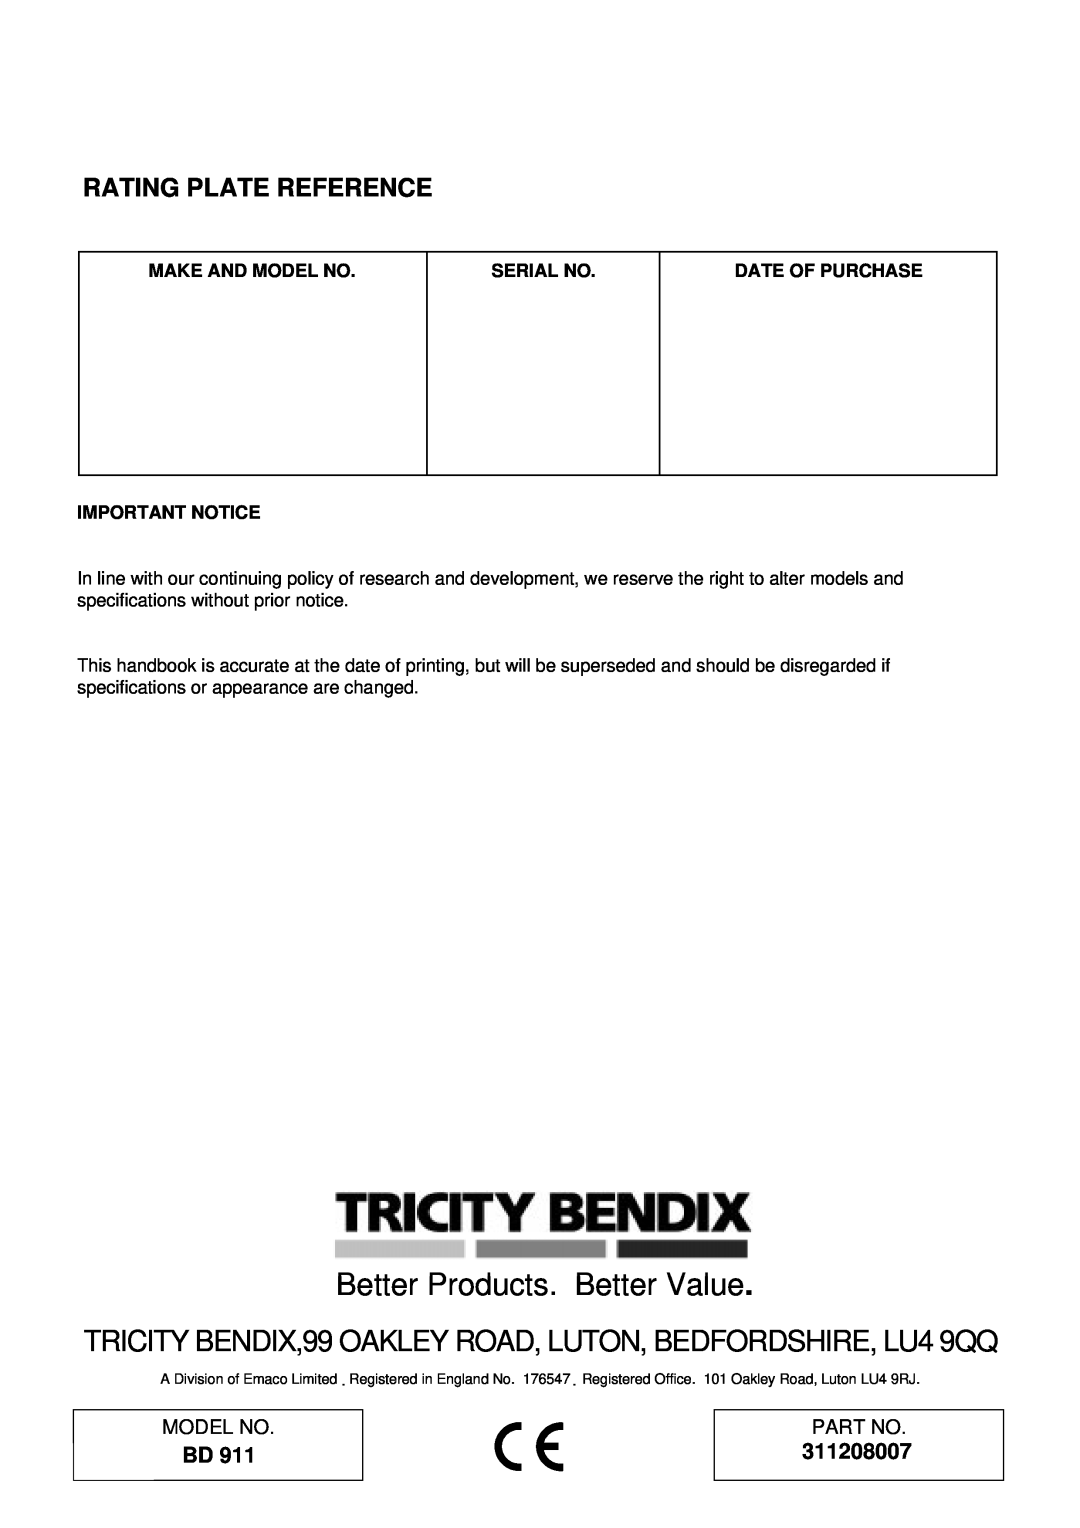 Tricity Bendix BD 911 Rating Plate Reference, 311208007, Better Products. Better Value, Make And Model No, Serial No 